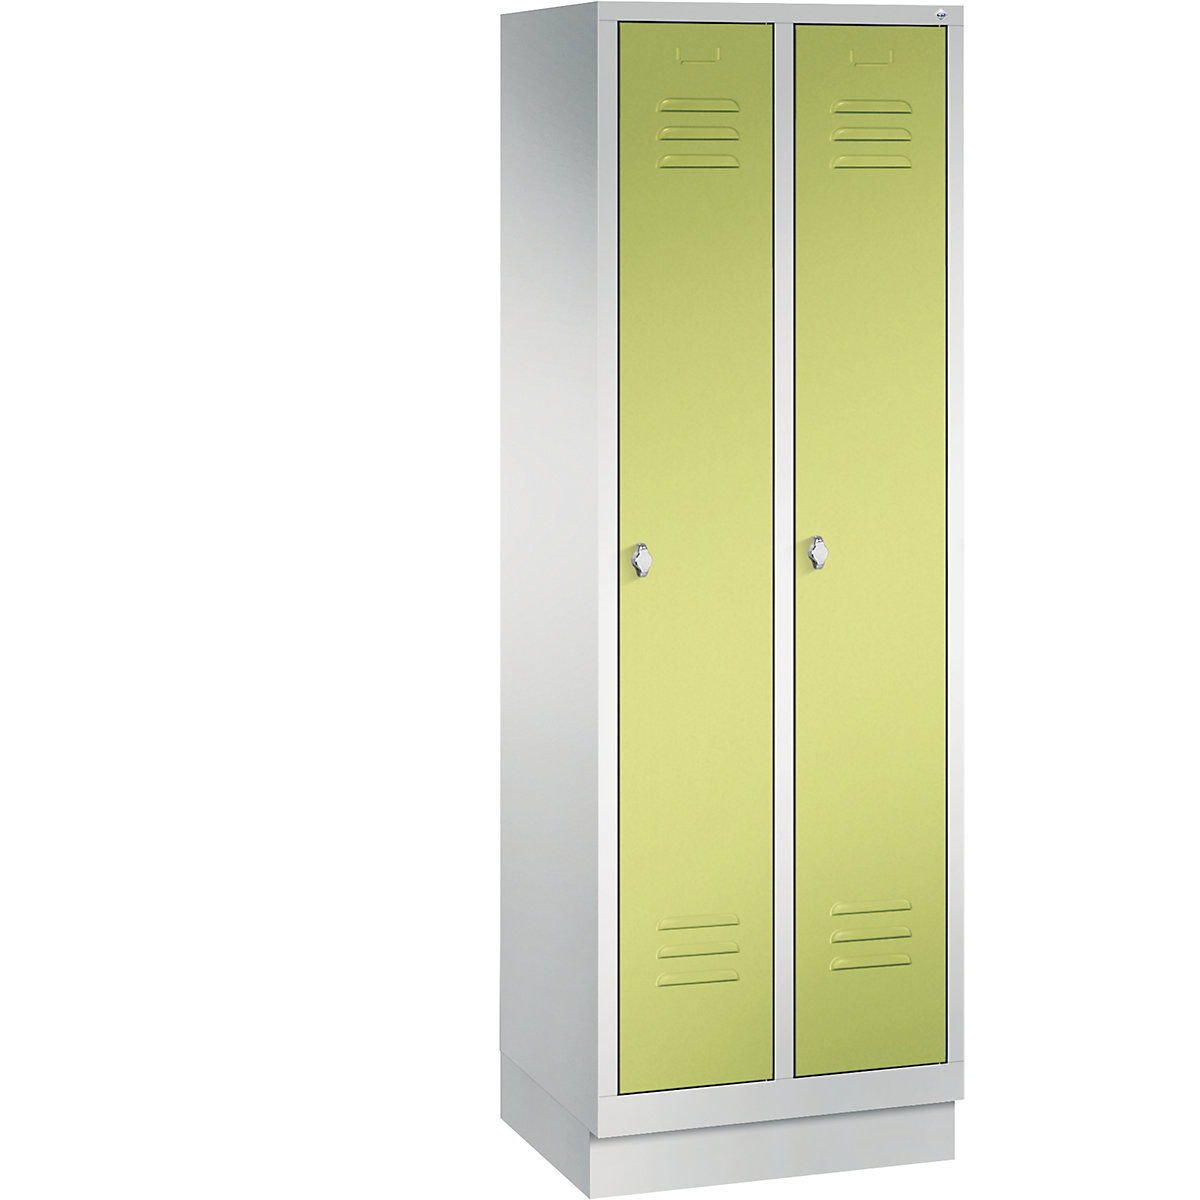 CLASSIC storage cupboard with plinth – C+P, 2 compartments, compartment width 300 mm, light grey / viridian green-10